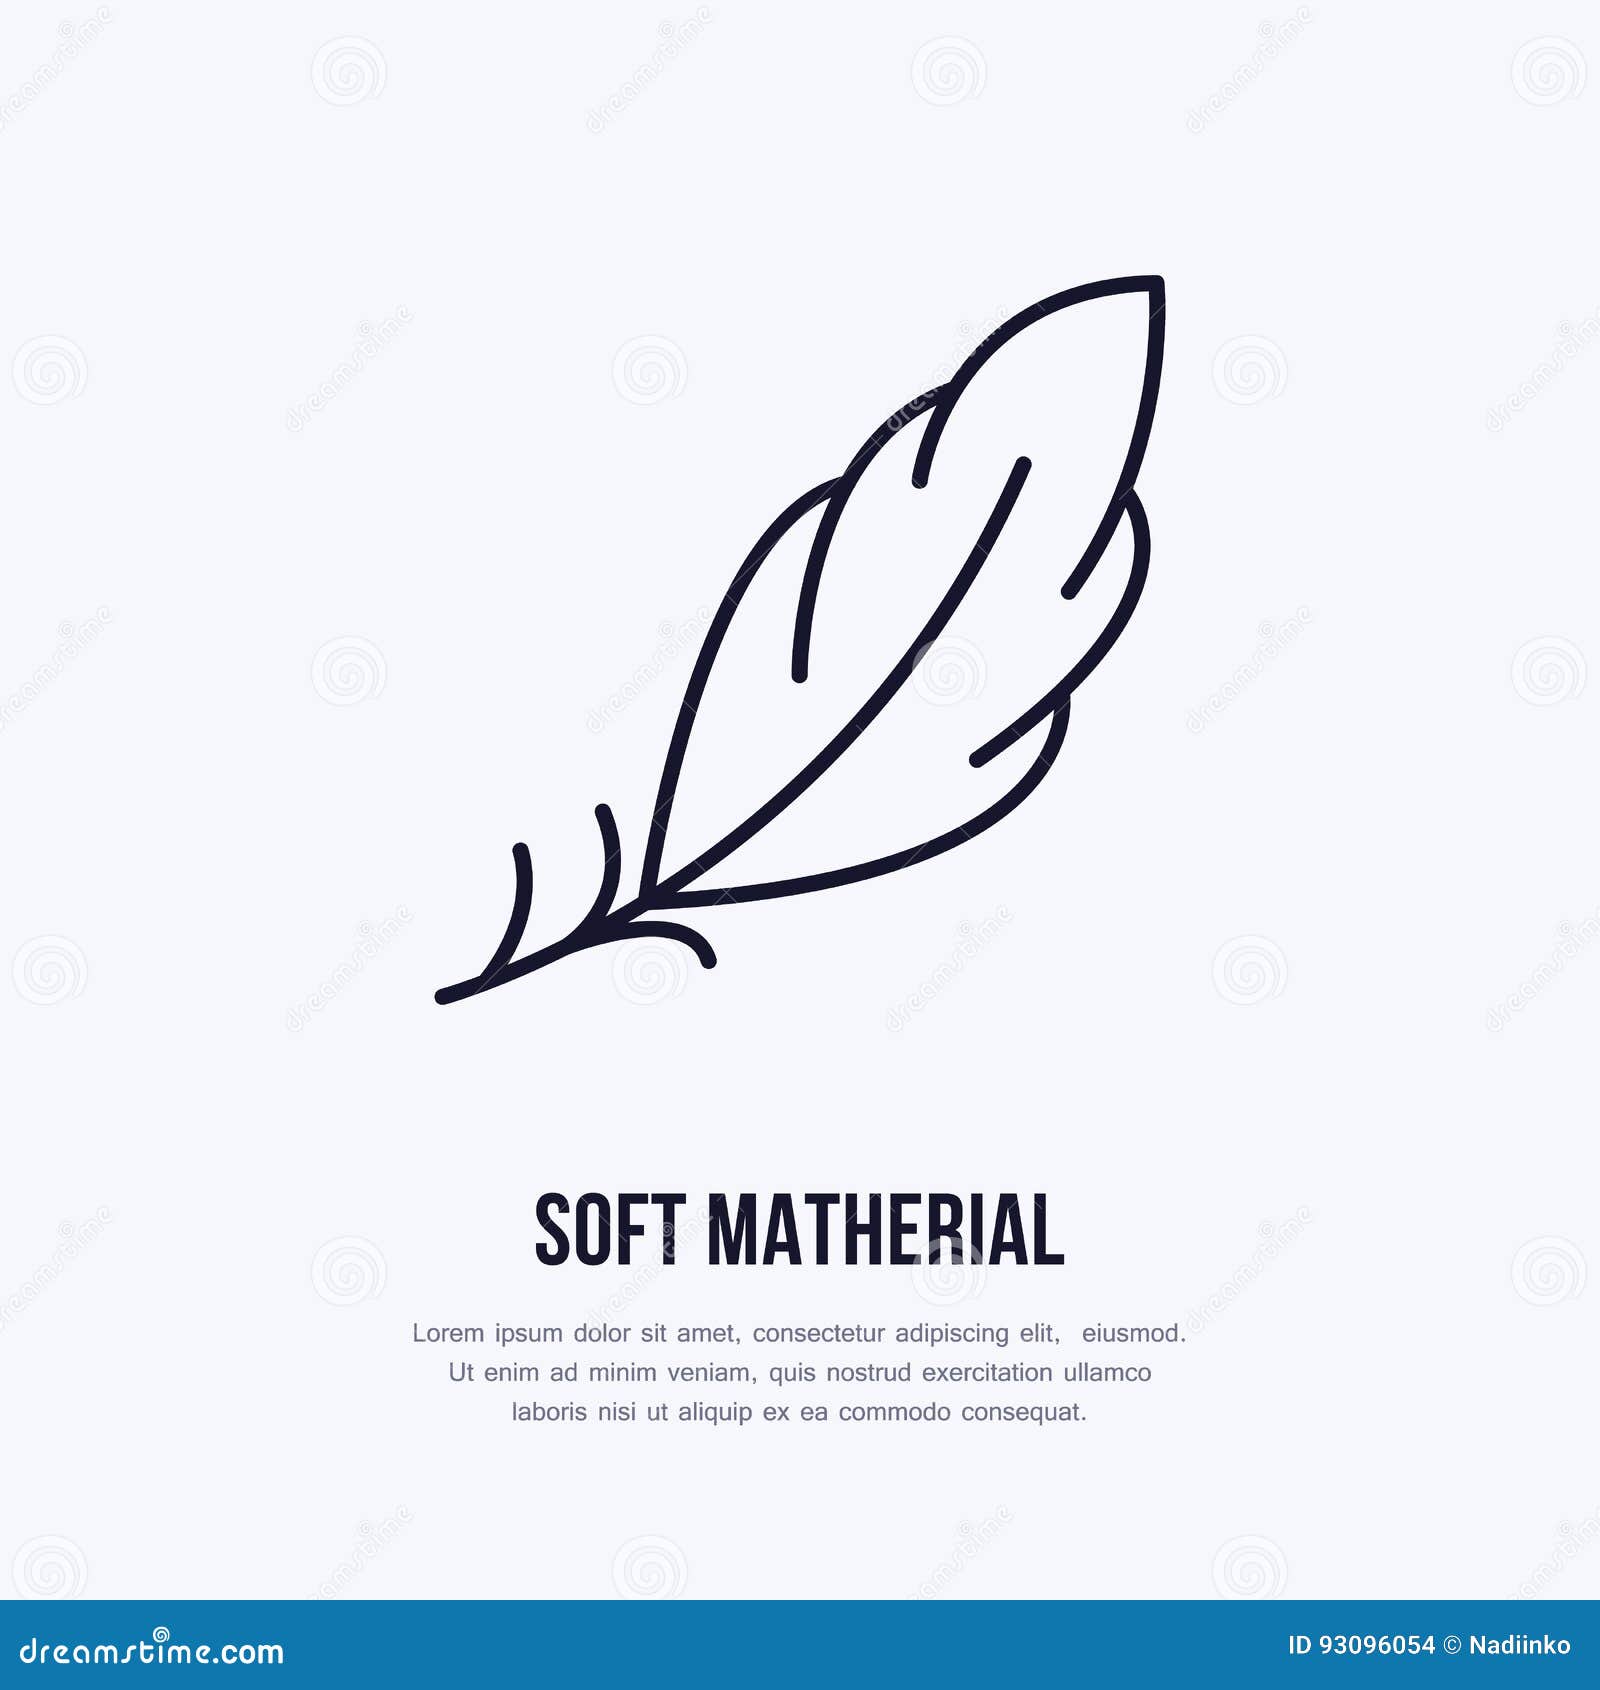 feather flat line icon.  sign for soft, lightweight matherial property